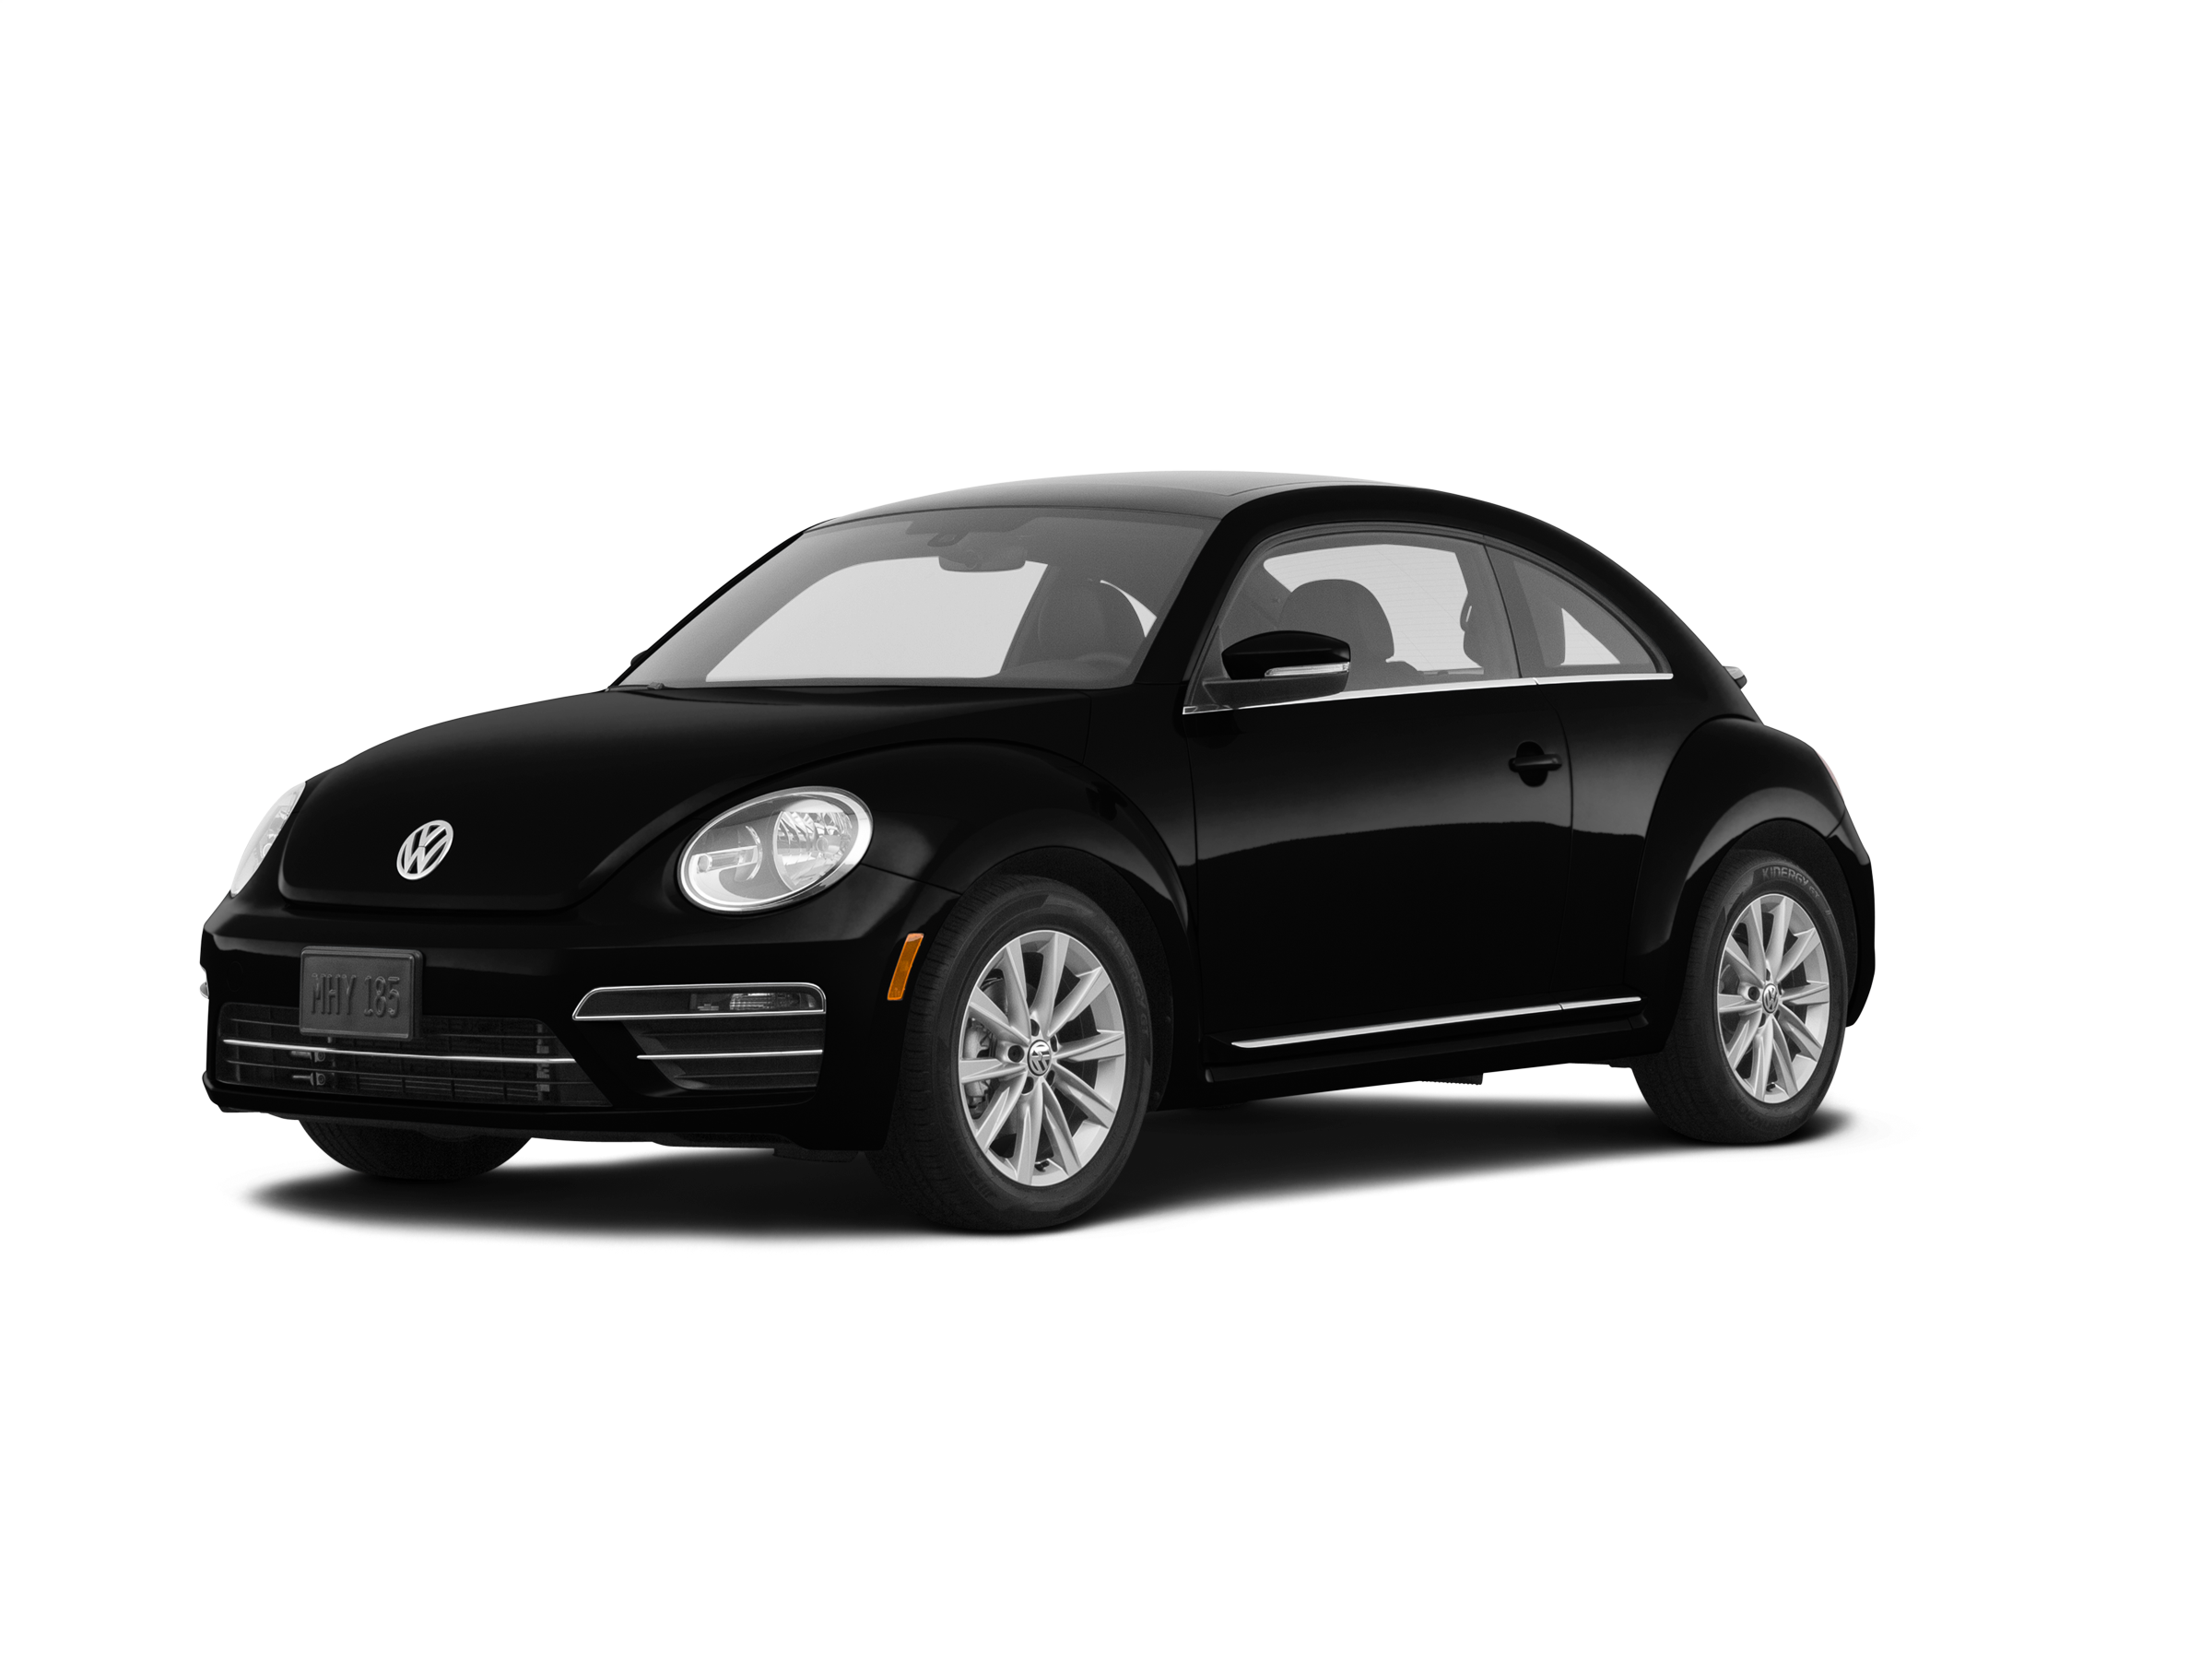 2019 Volkswagen Beetle Prices, Reviews, and Photos - MotorTrend